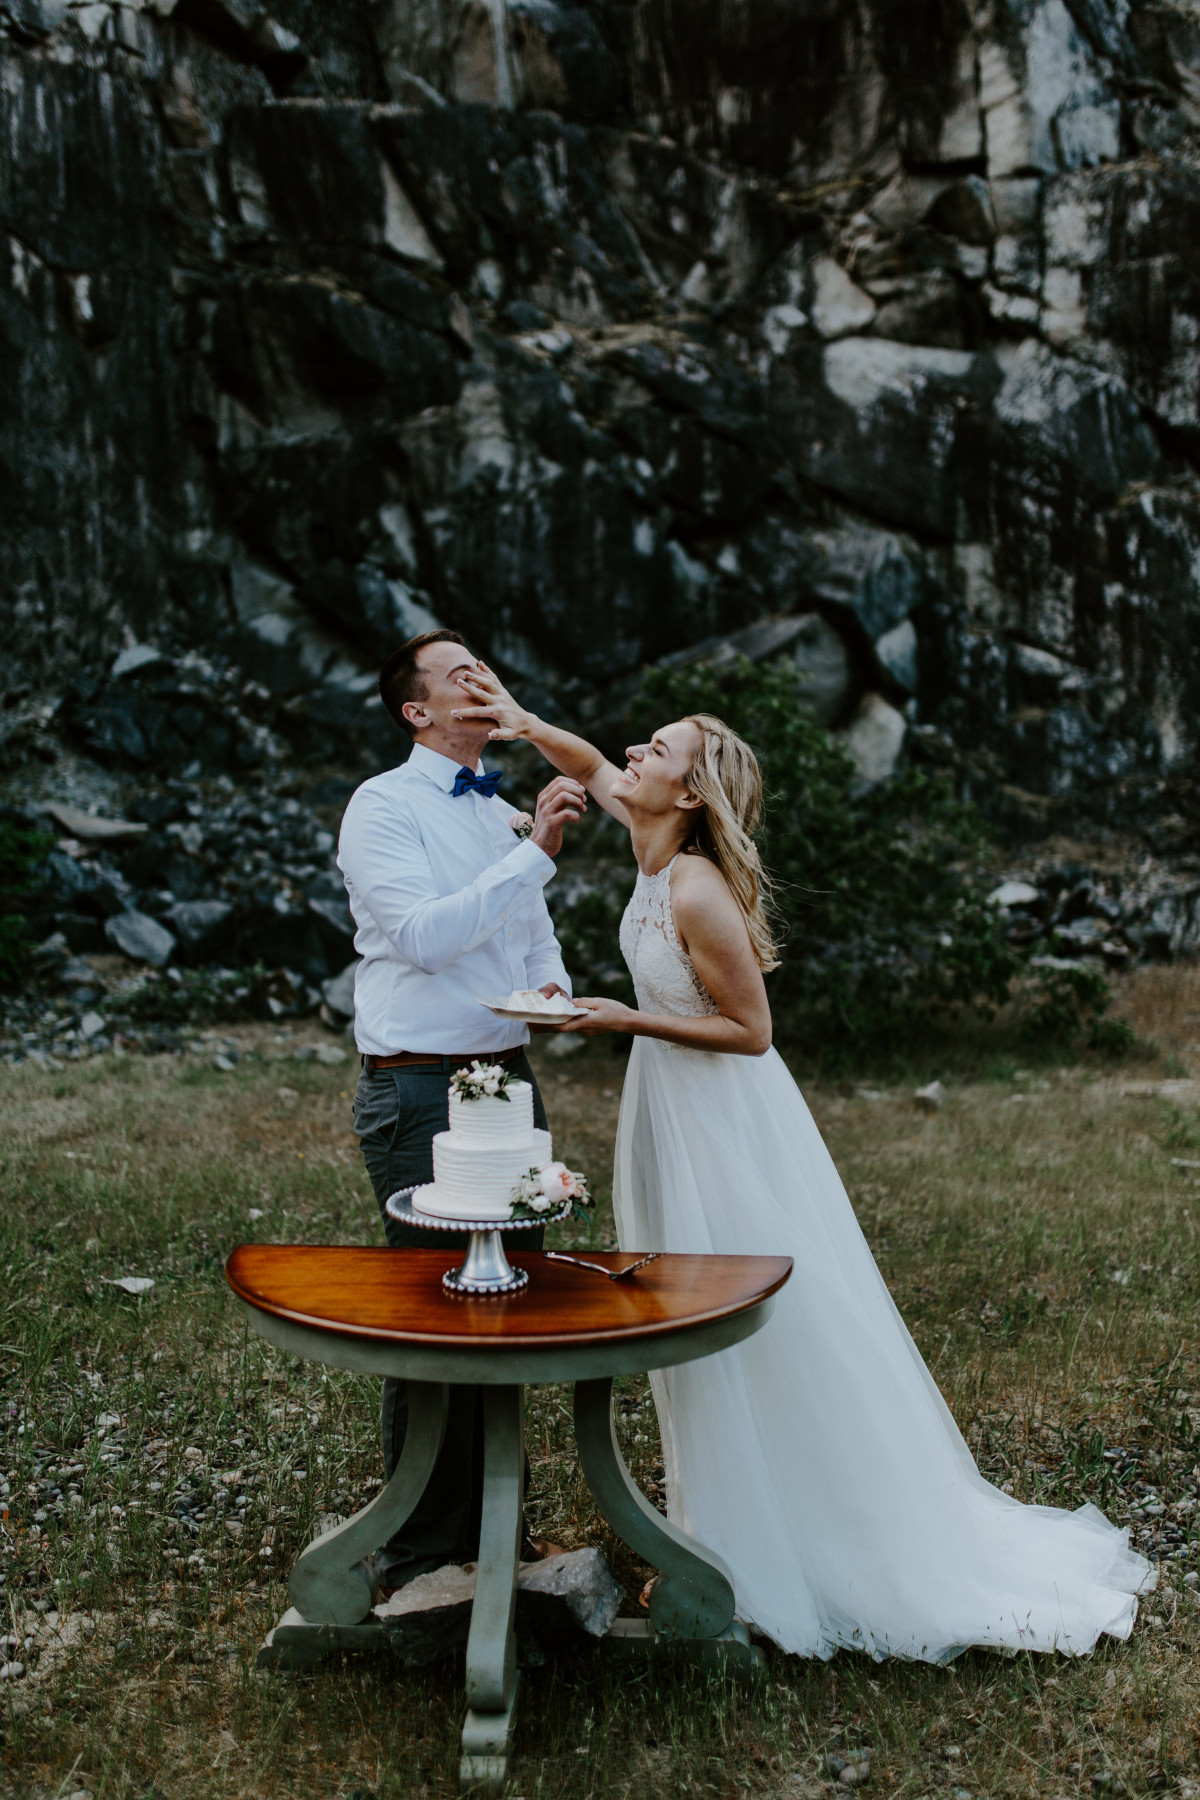 Harper smashes cake into Trevor's face at Cascade Locks at the Columbia Gorge, Oregon. Elopement photography in Portland Oregon by Sienna Plus Josh.